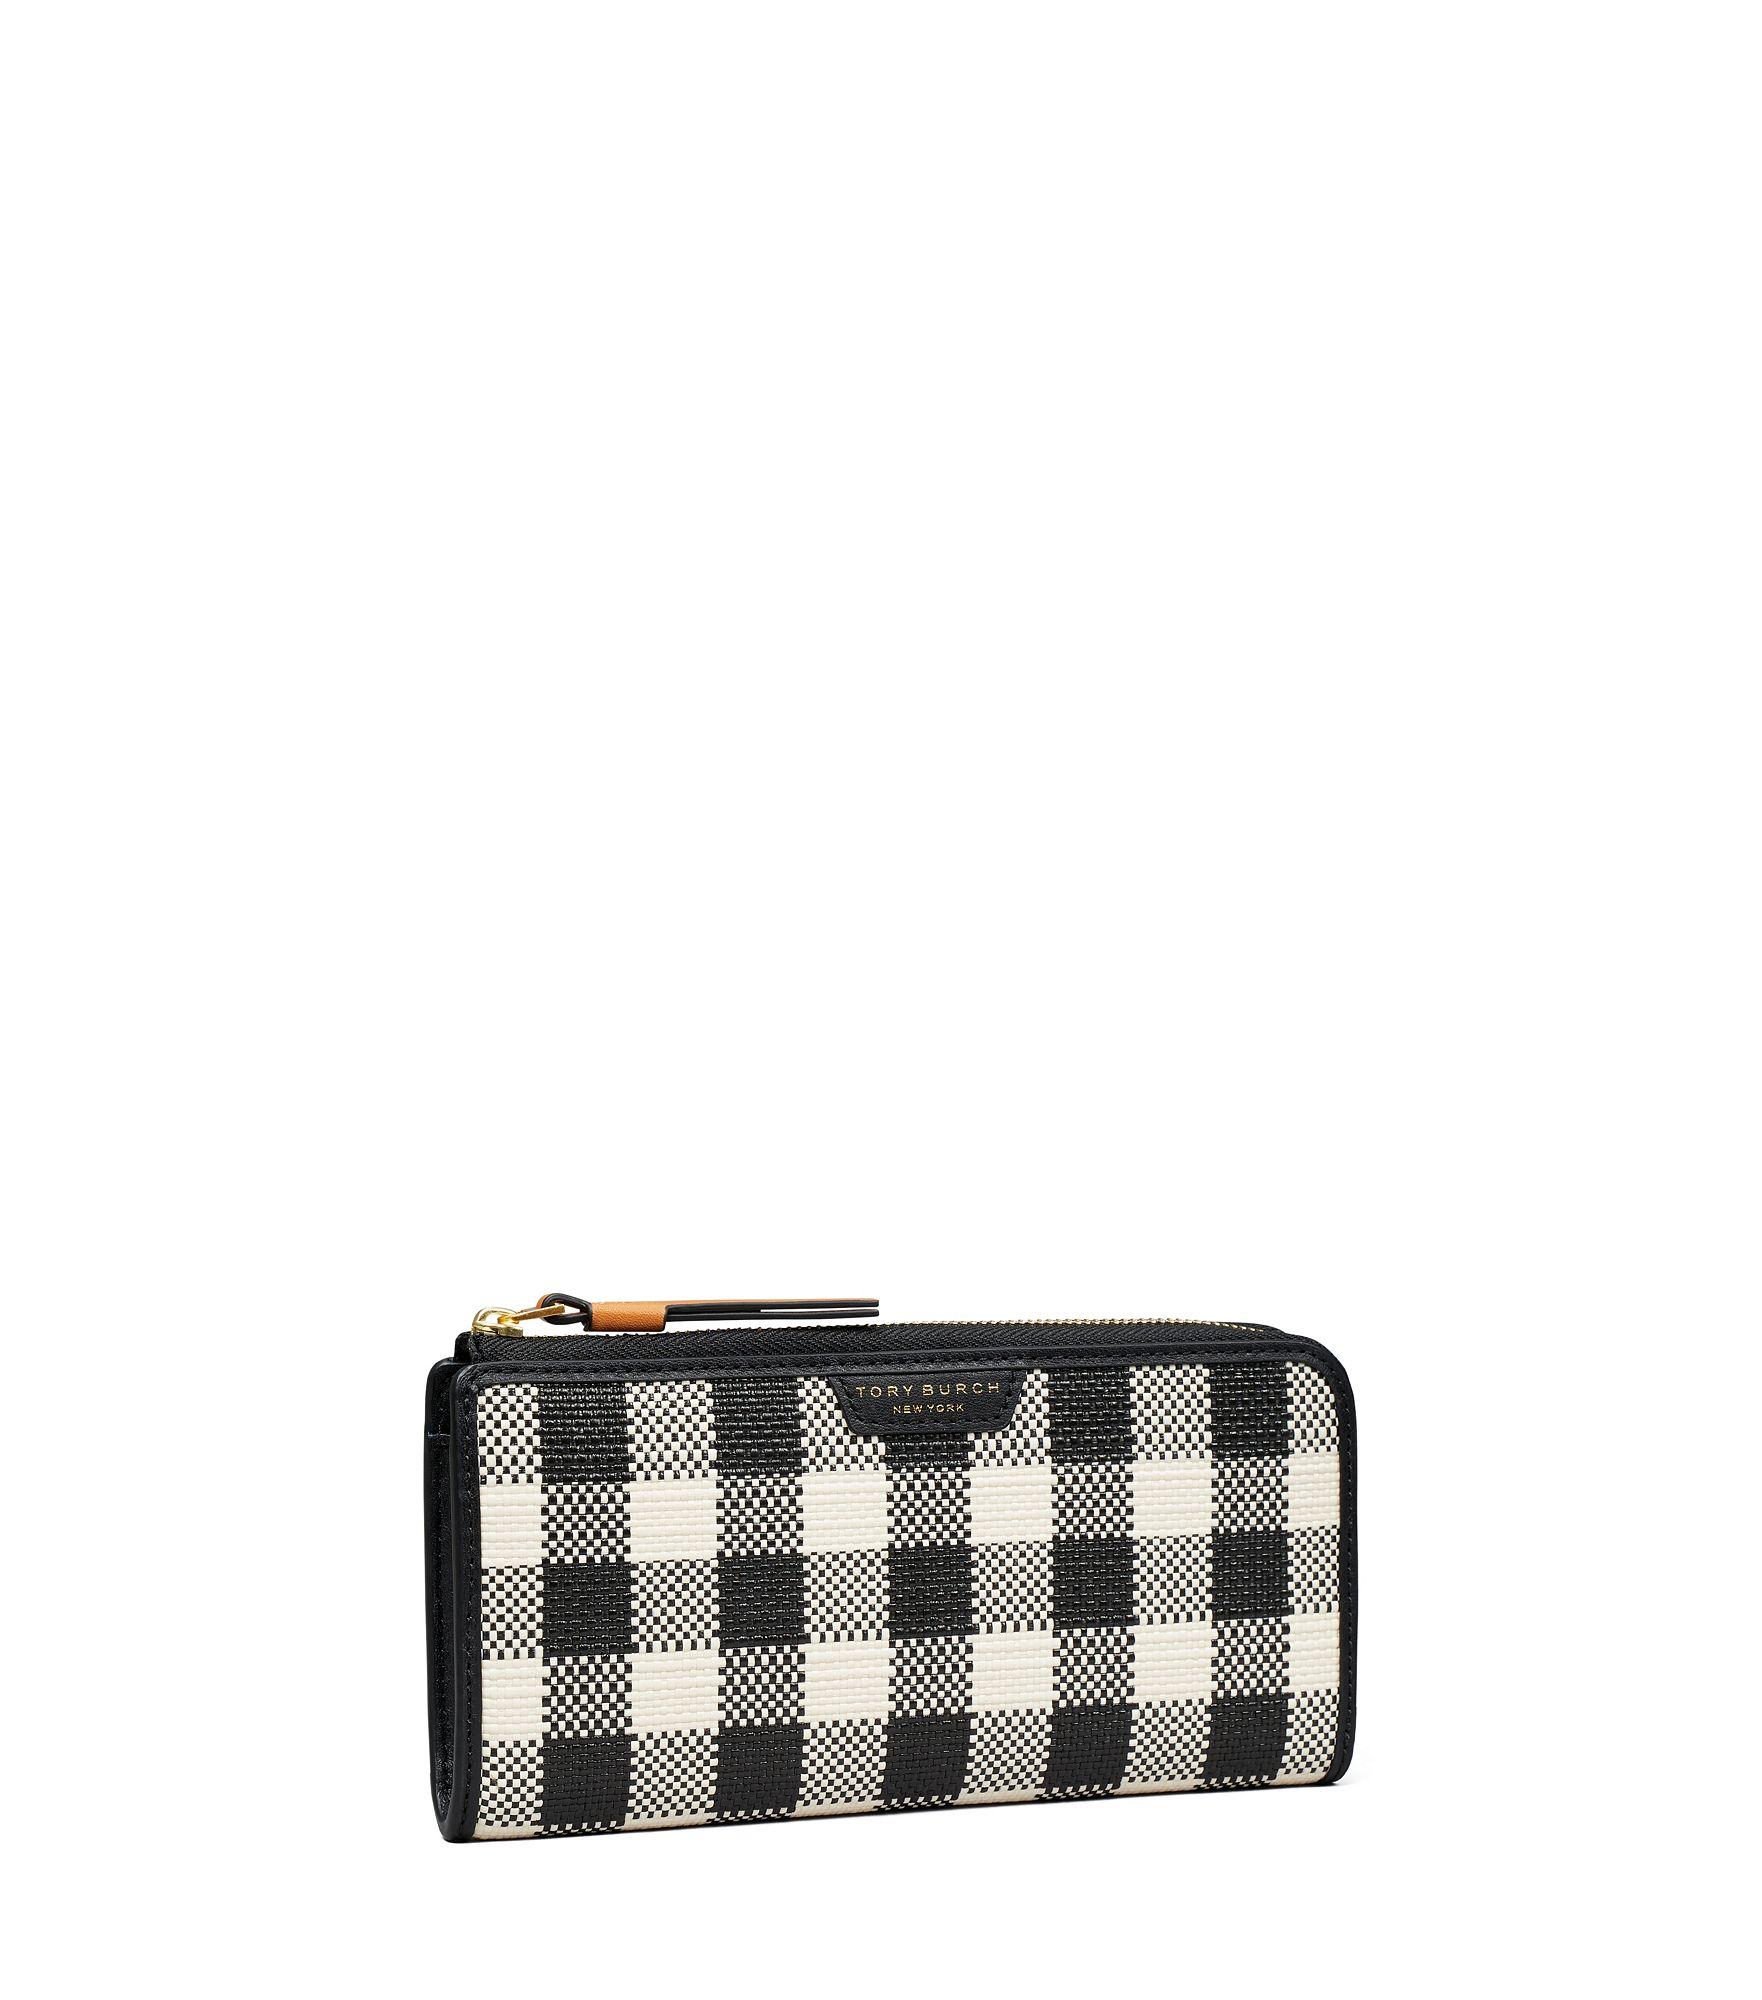 Tory Burch Perry Gingham Zip Continental Wallet in Black | Lyst